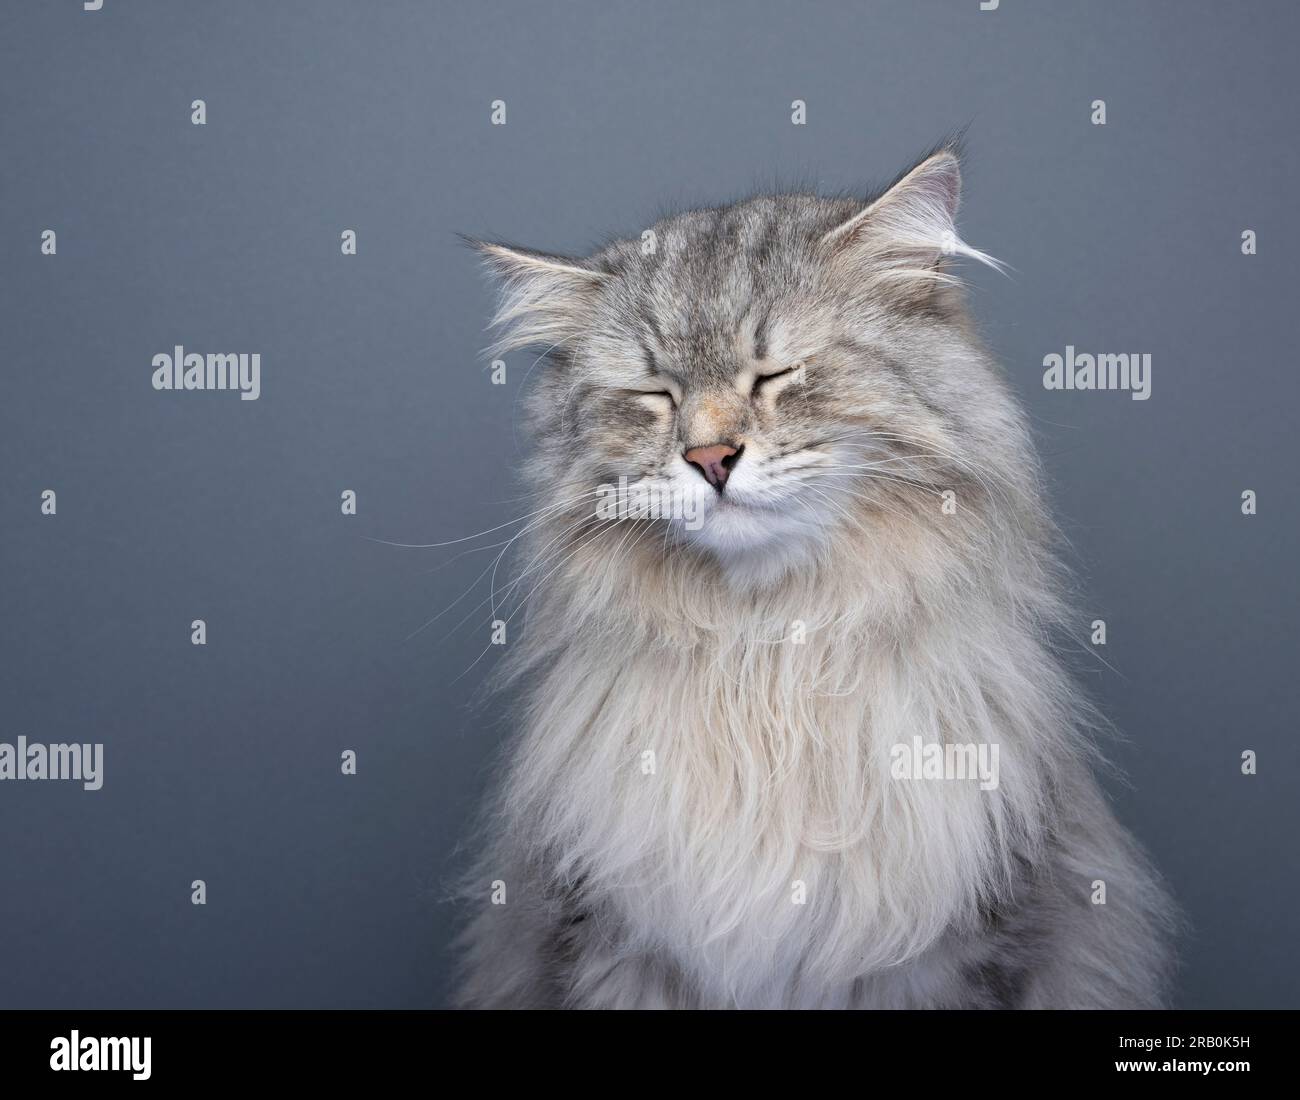 fluffy siberian cat looking sad with eyes closed. studio shot on gray background with copy space Stock Photo